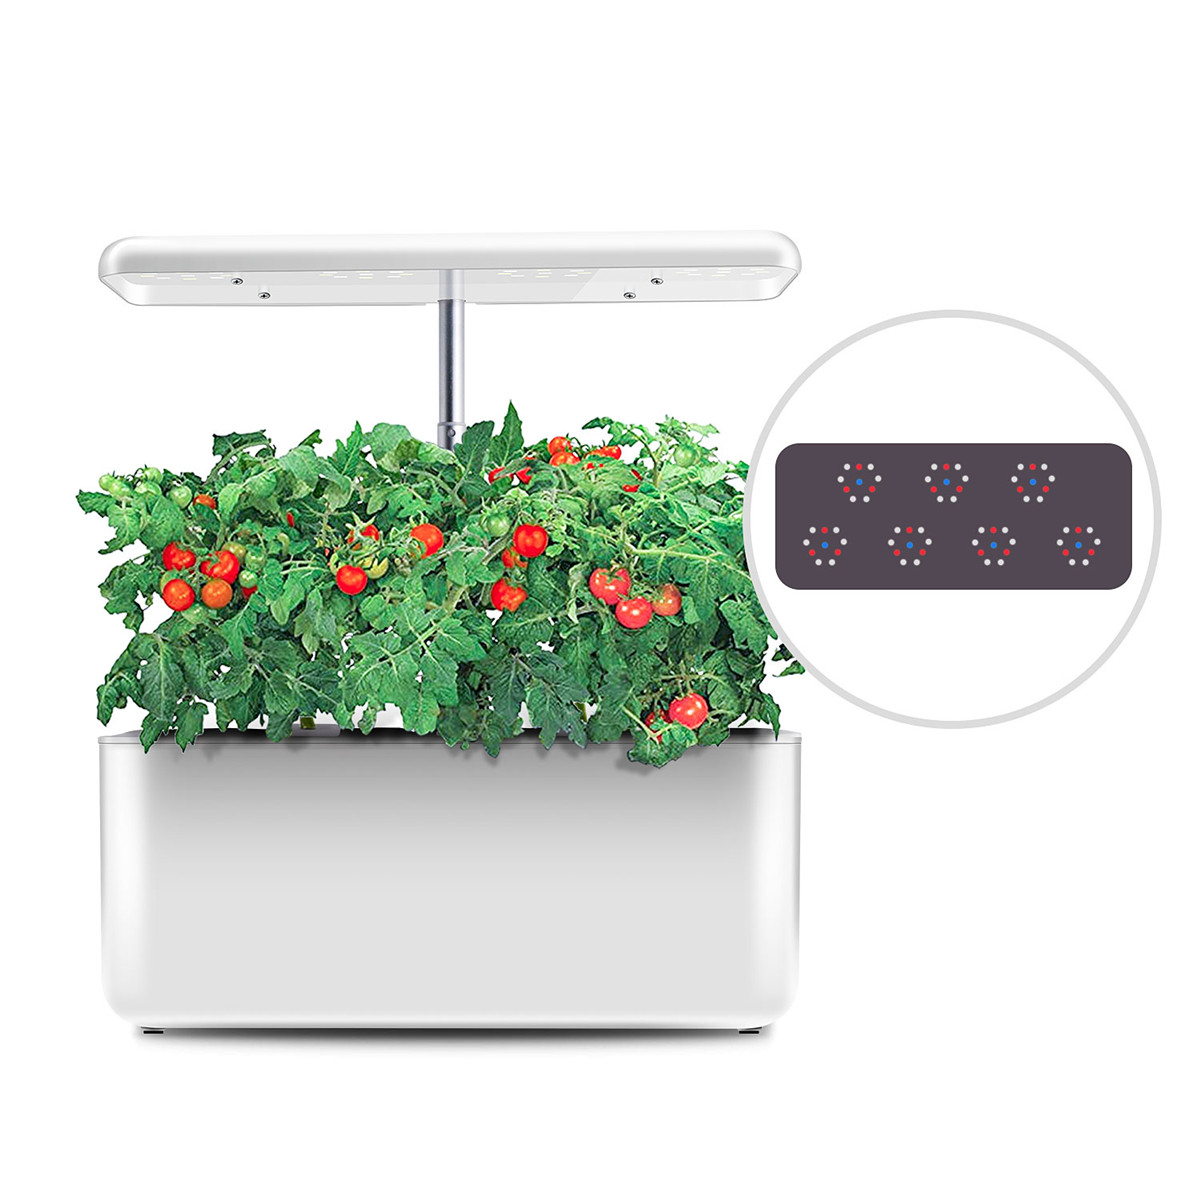 35W-Indoor-Plant-Hydroponics-Grow-Light-LED-Garden-Light-For-Plants-Flowers-Seedling-Cultivation-1570166-5